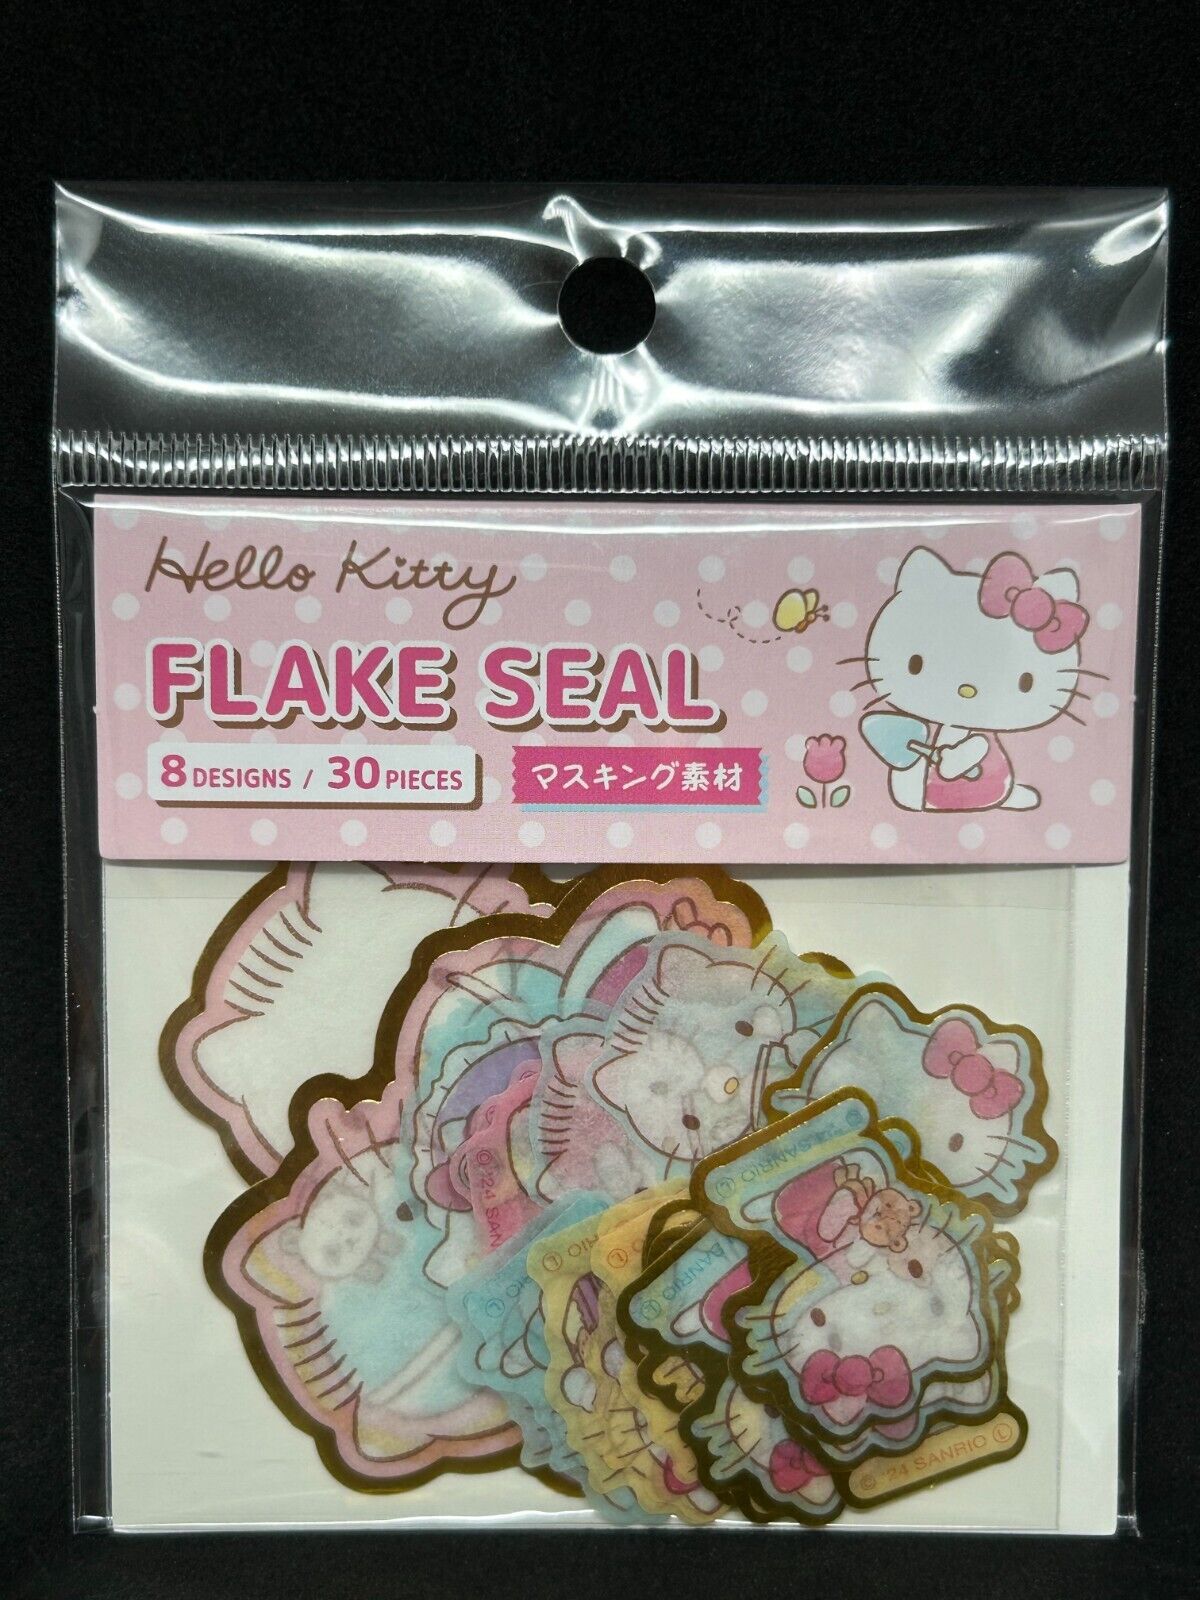 Sanrio character Flake sticker-10 designs 30pieces Japan limited Cinnamoroll etc